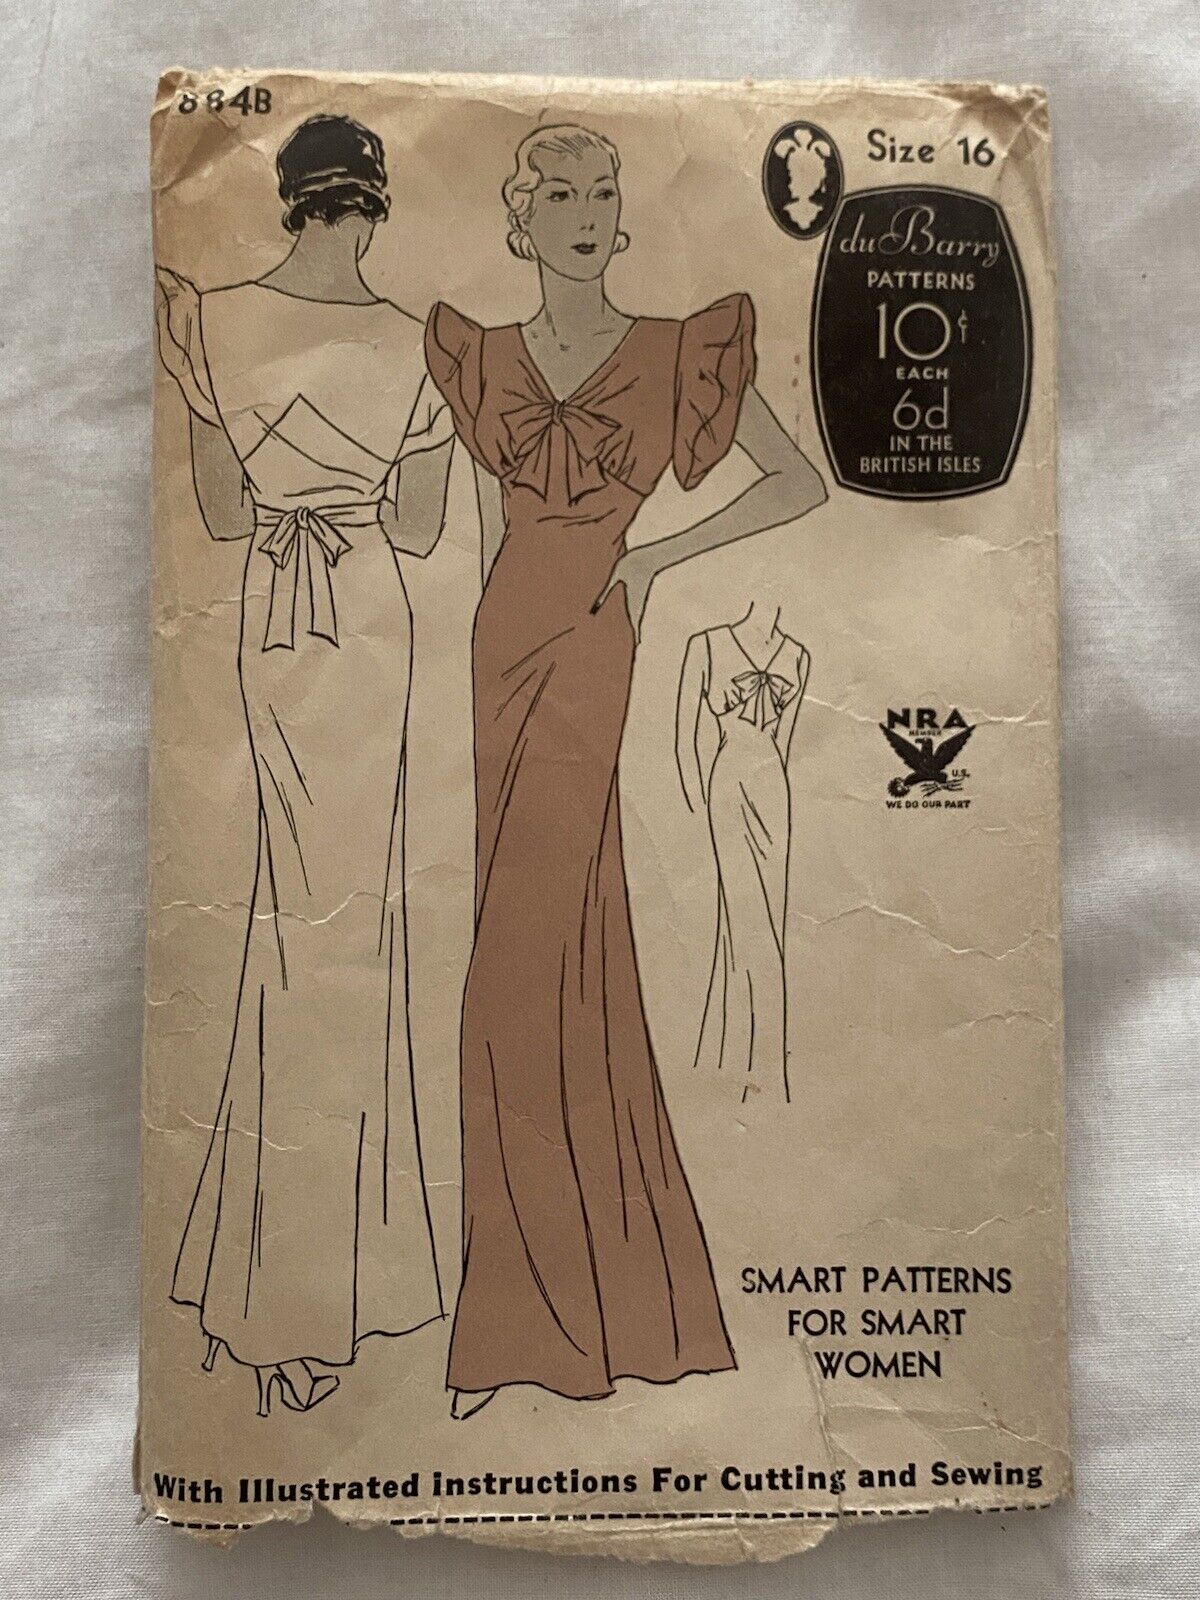 Vintage du Barry Sewing Patterns Evening Gown Homemade Babe Ruth Newspaper Piece